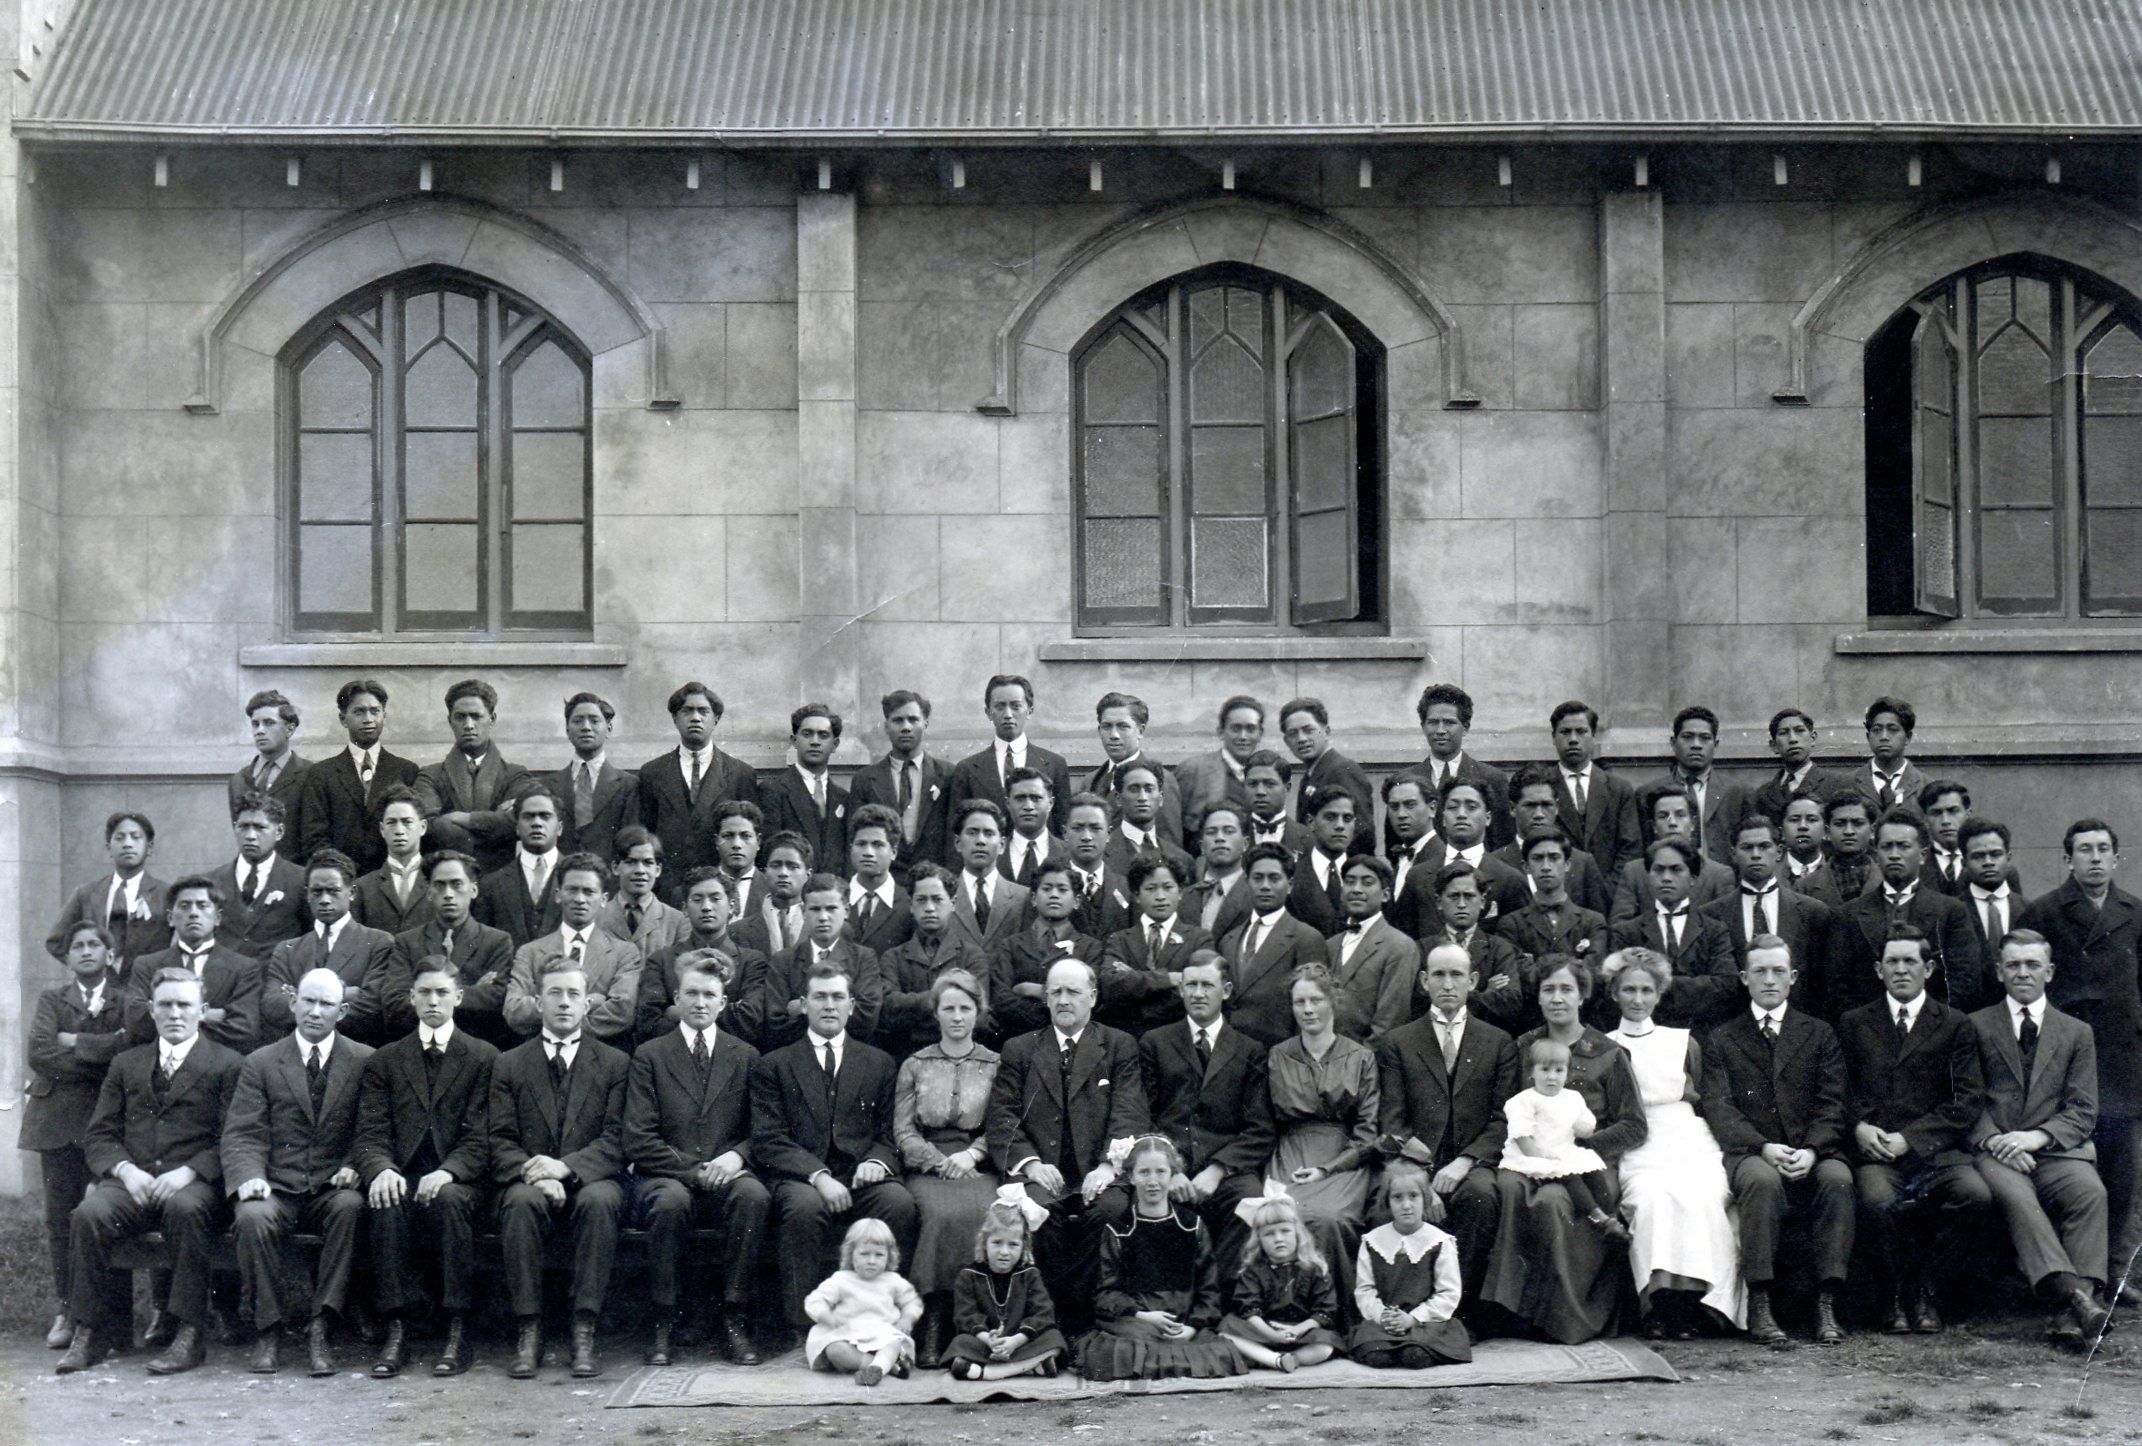 Staff and students at Maori Agricultural college, about 1918 – 1919